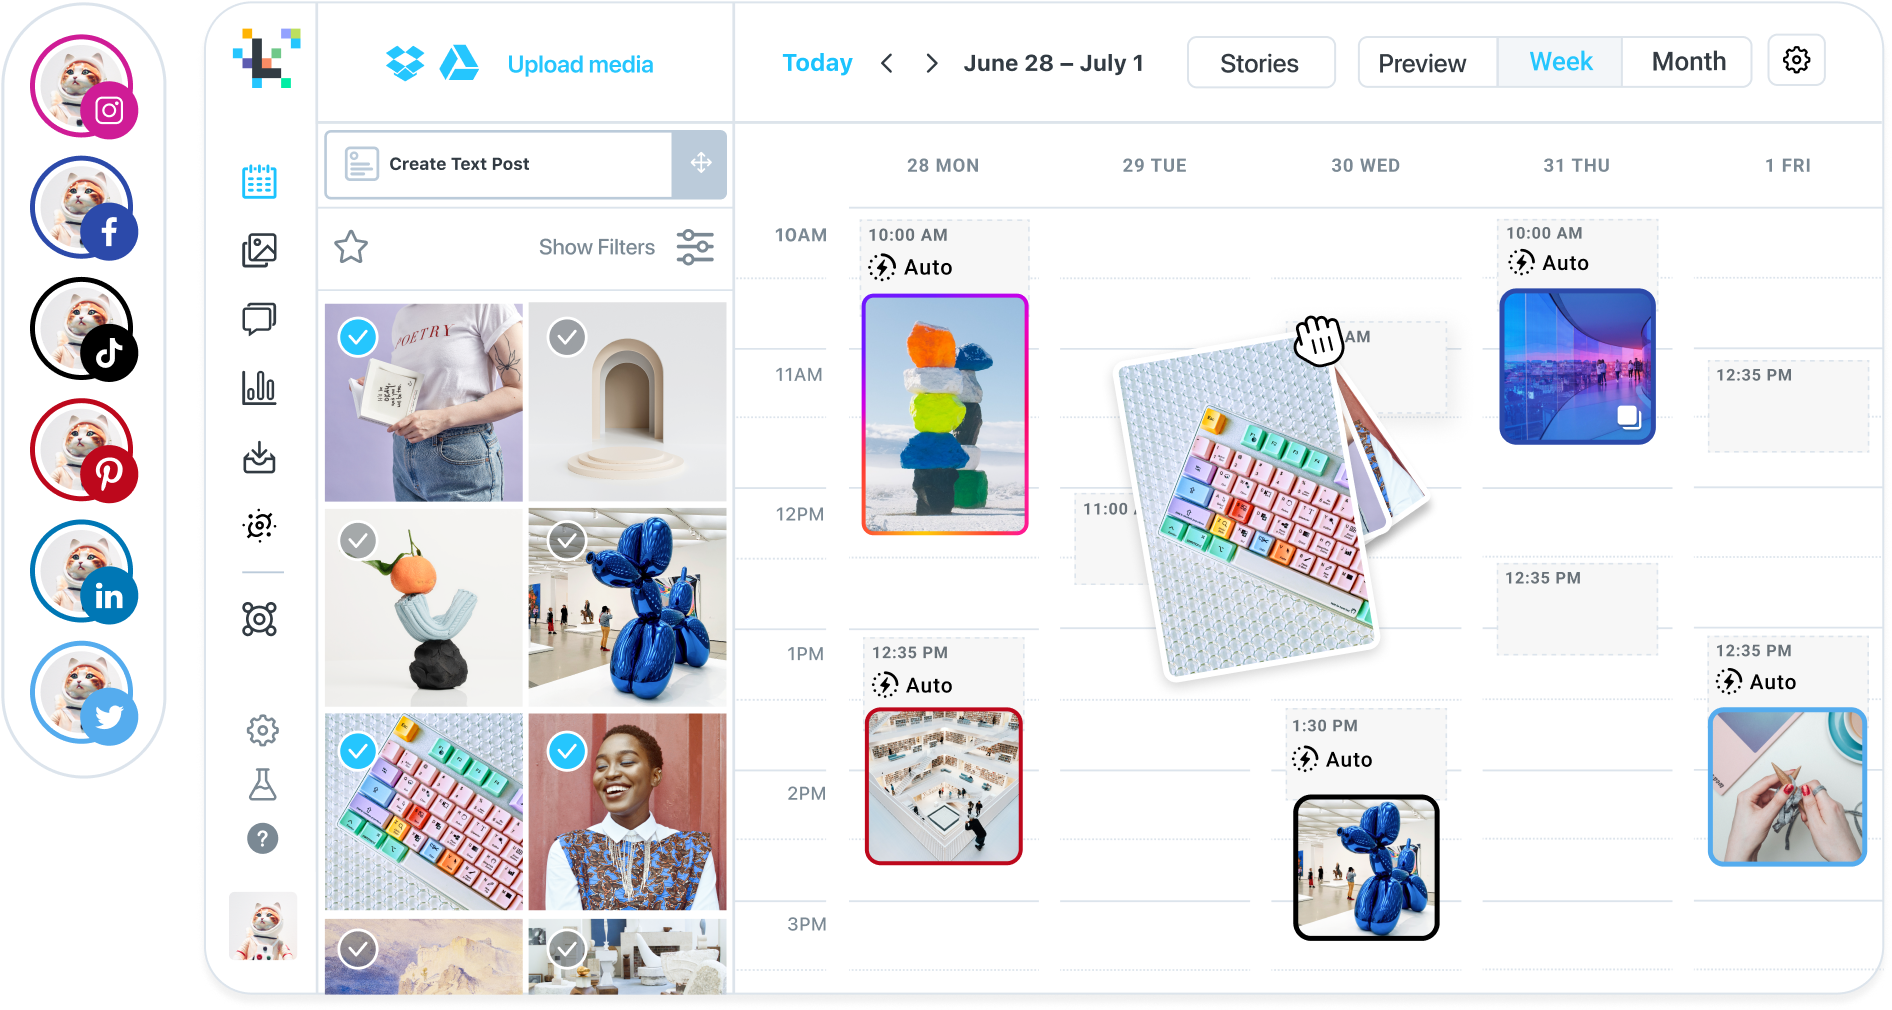 Later social media management platform highlighting the visual content calendar and Media Library